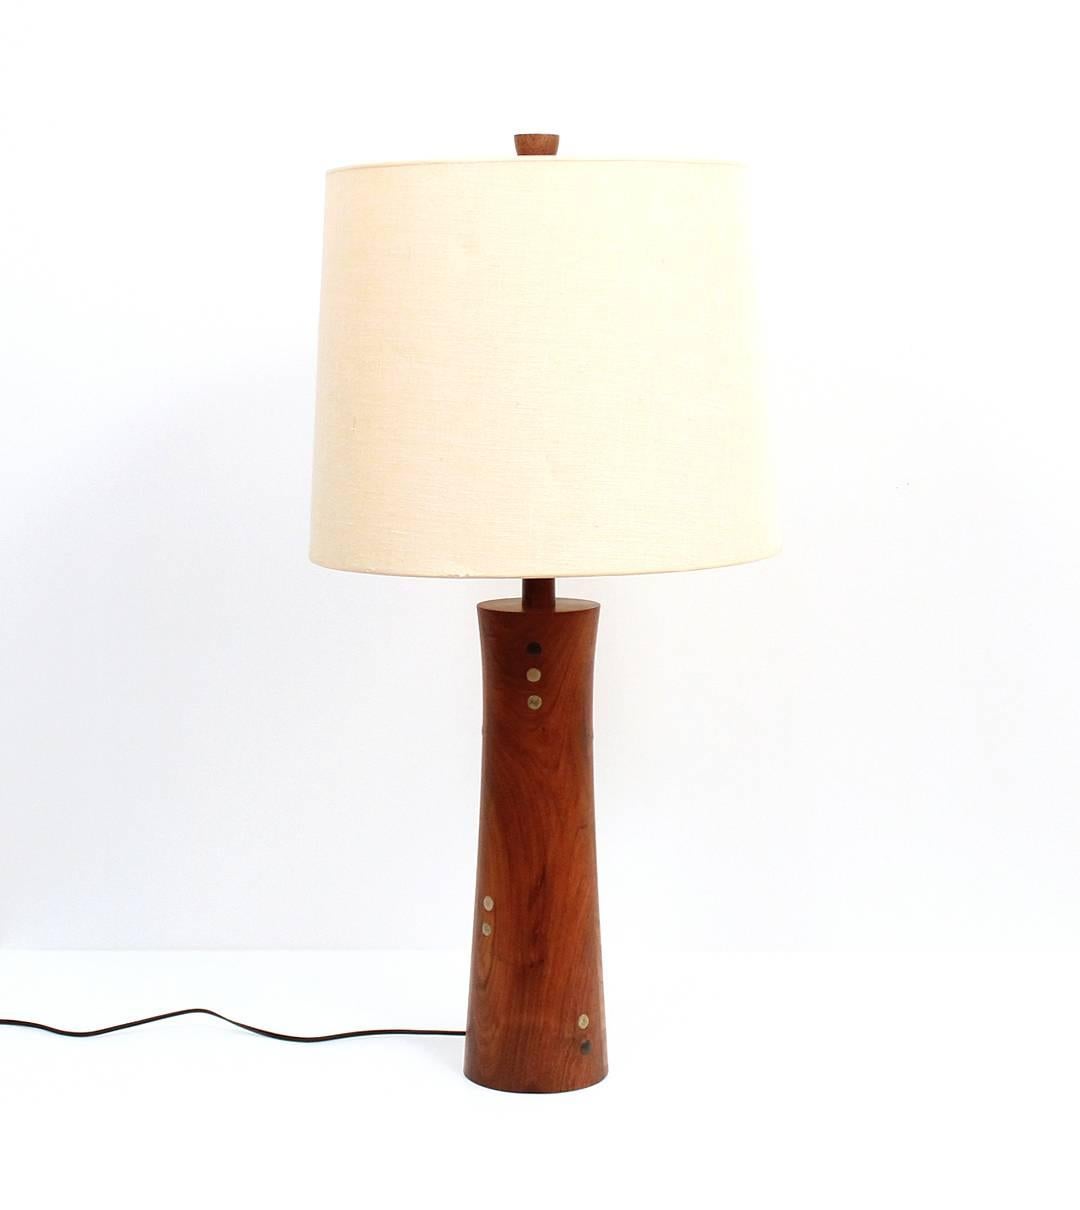 Mid-Century Modern Pair of Ceramic and Walnut Table Lamps by Martz